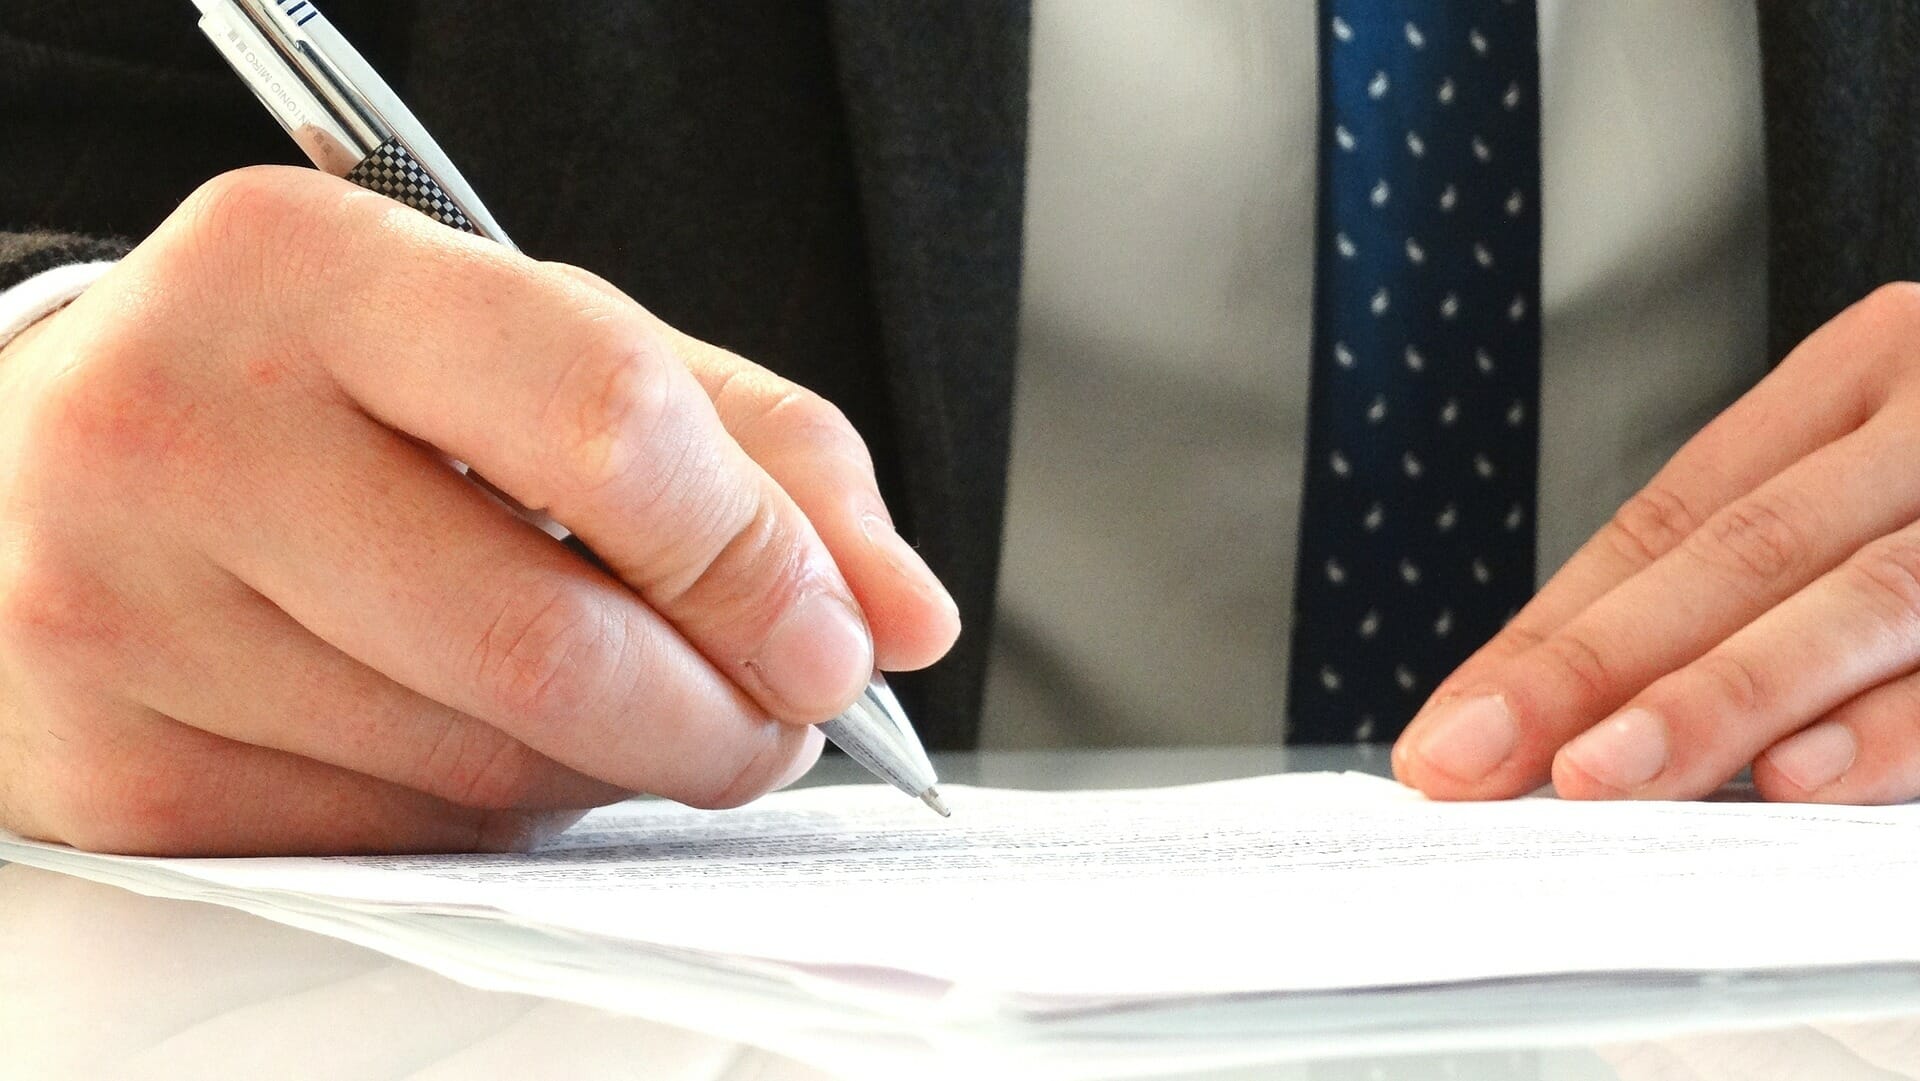 Man signing a document